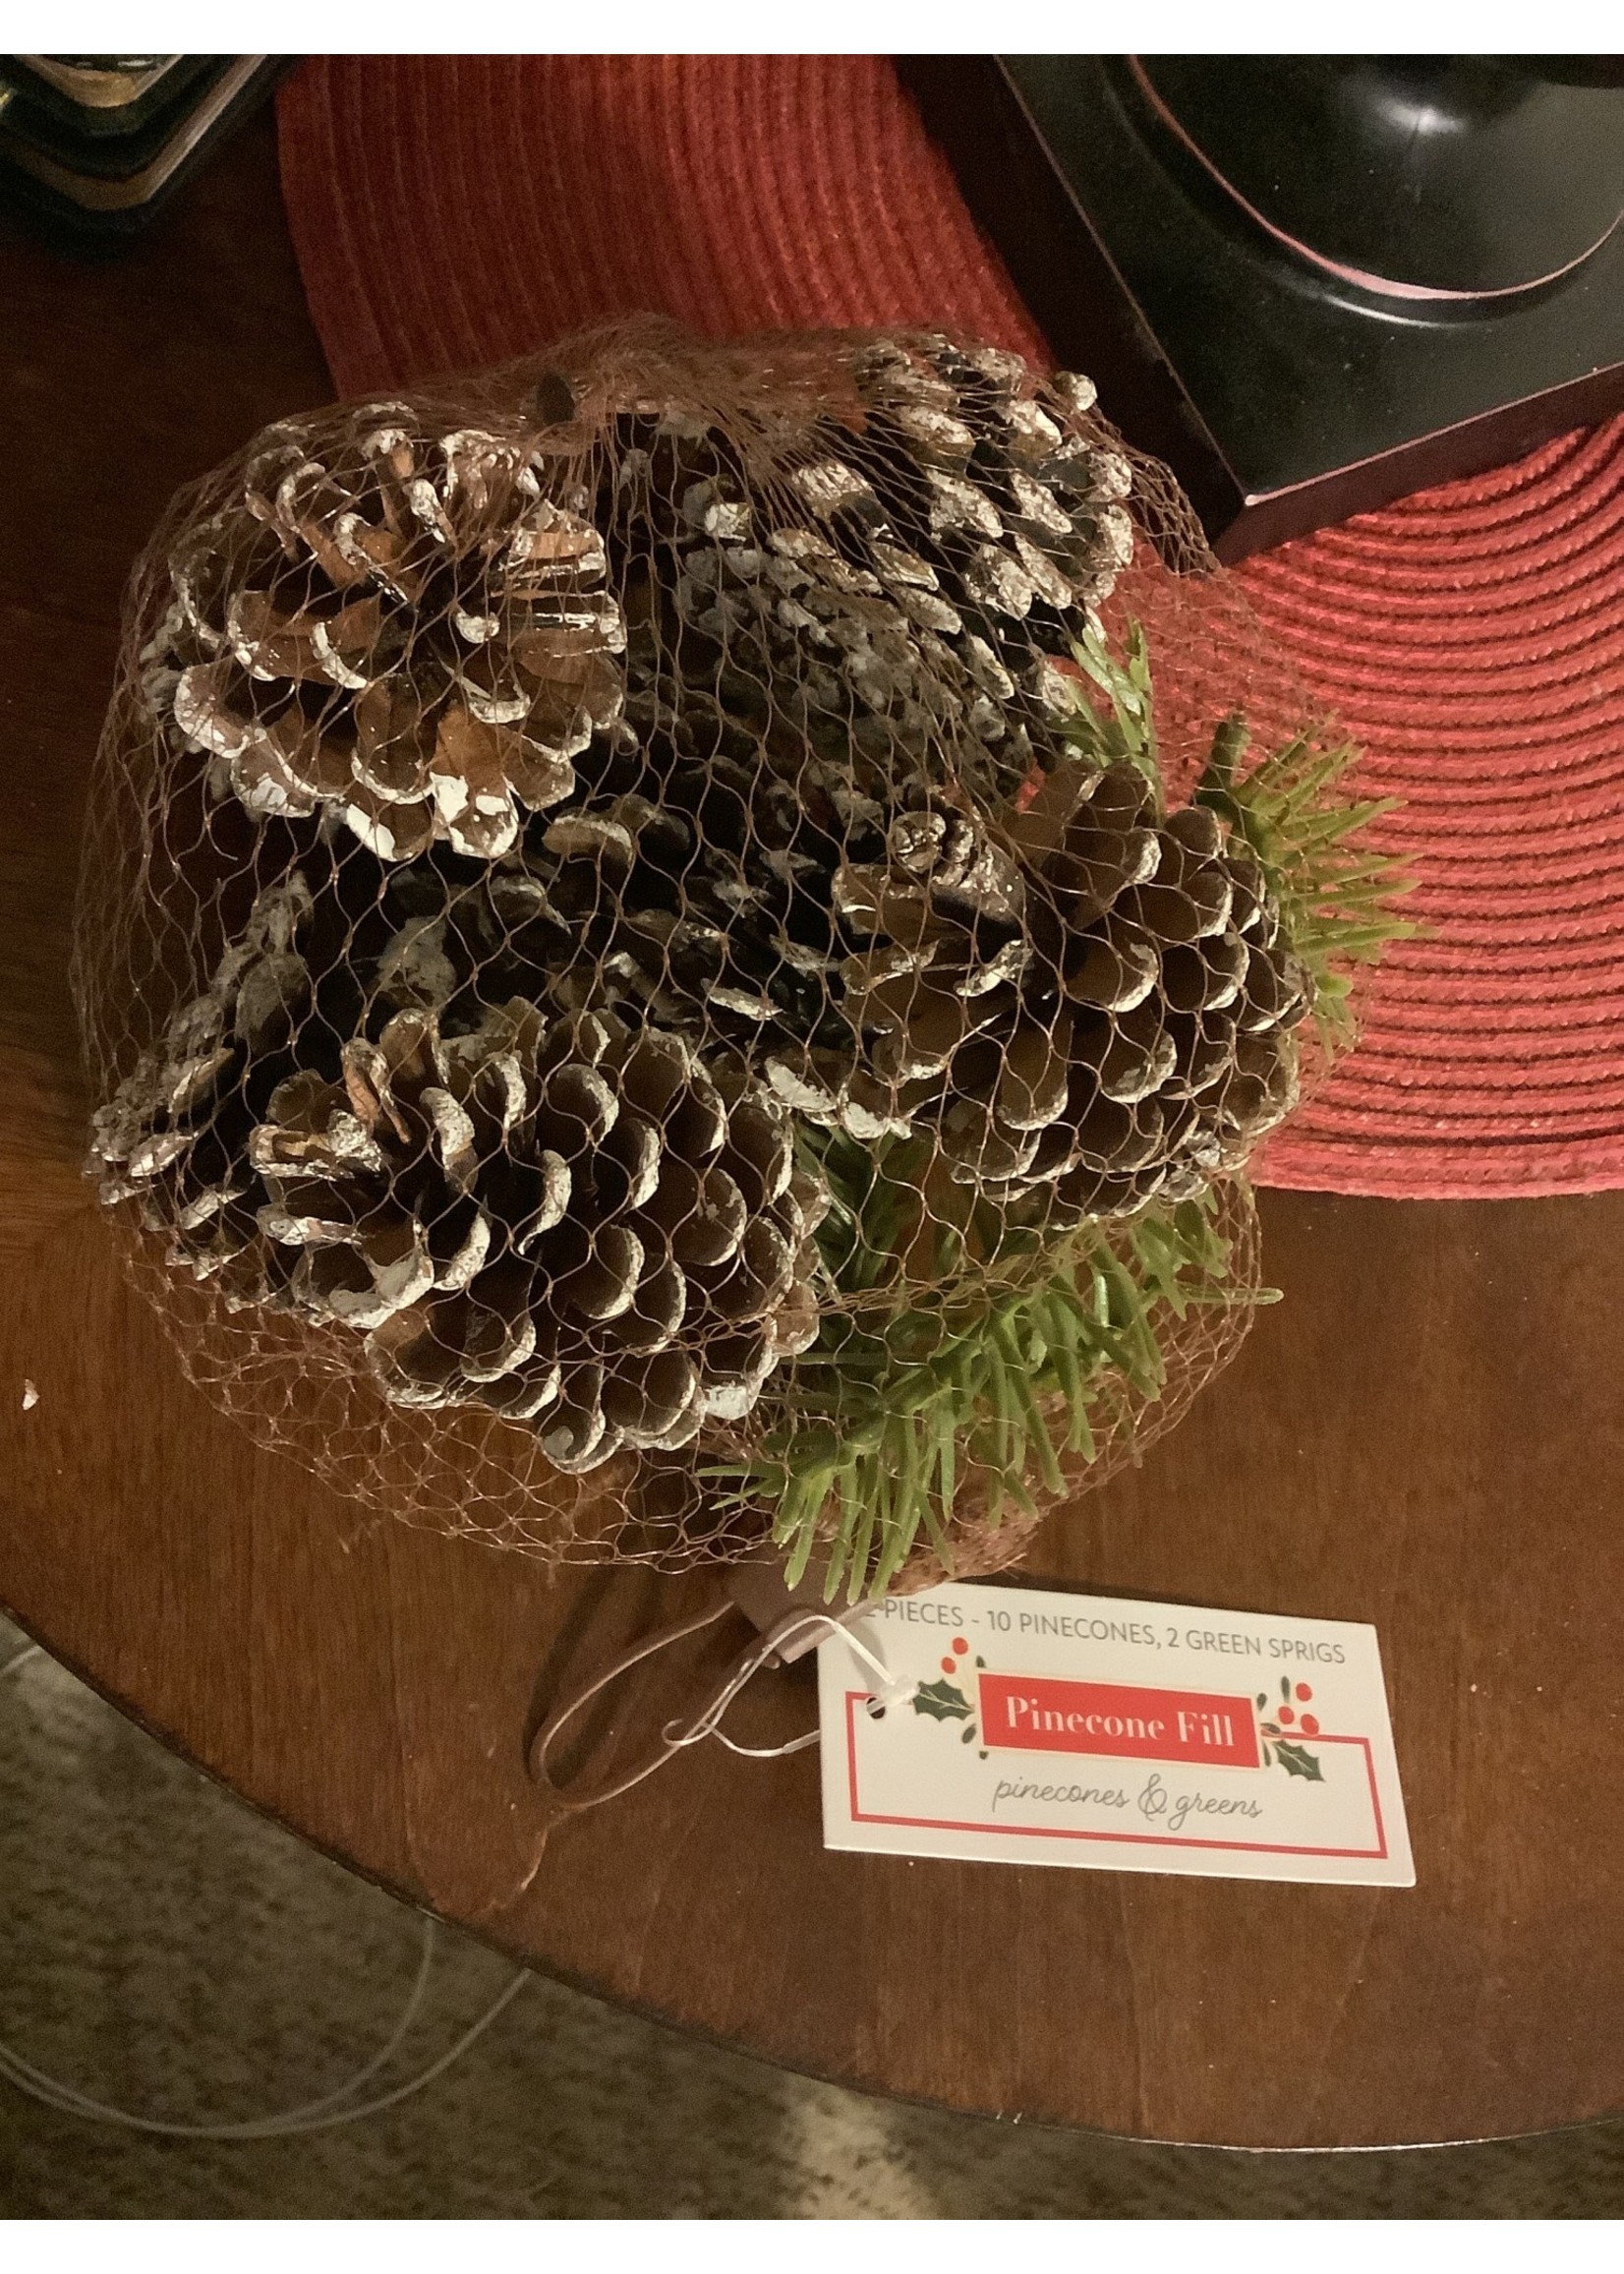 Pinecone Fill 12 pieces